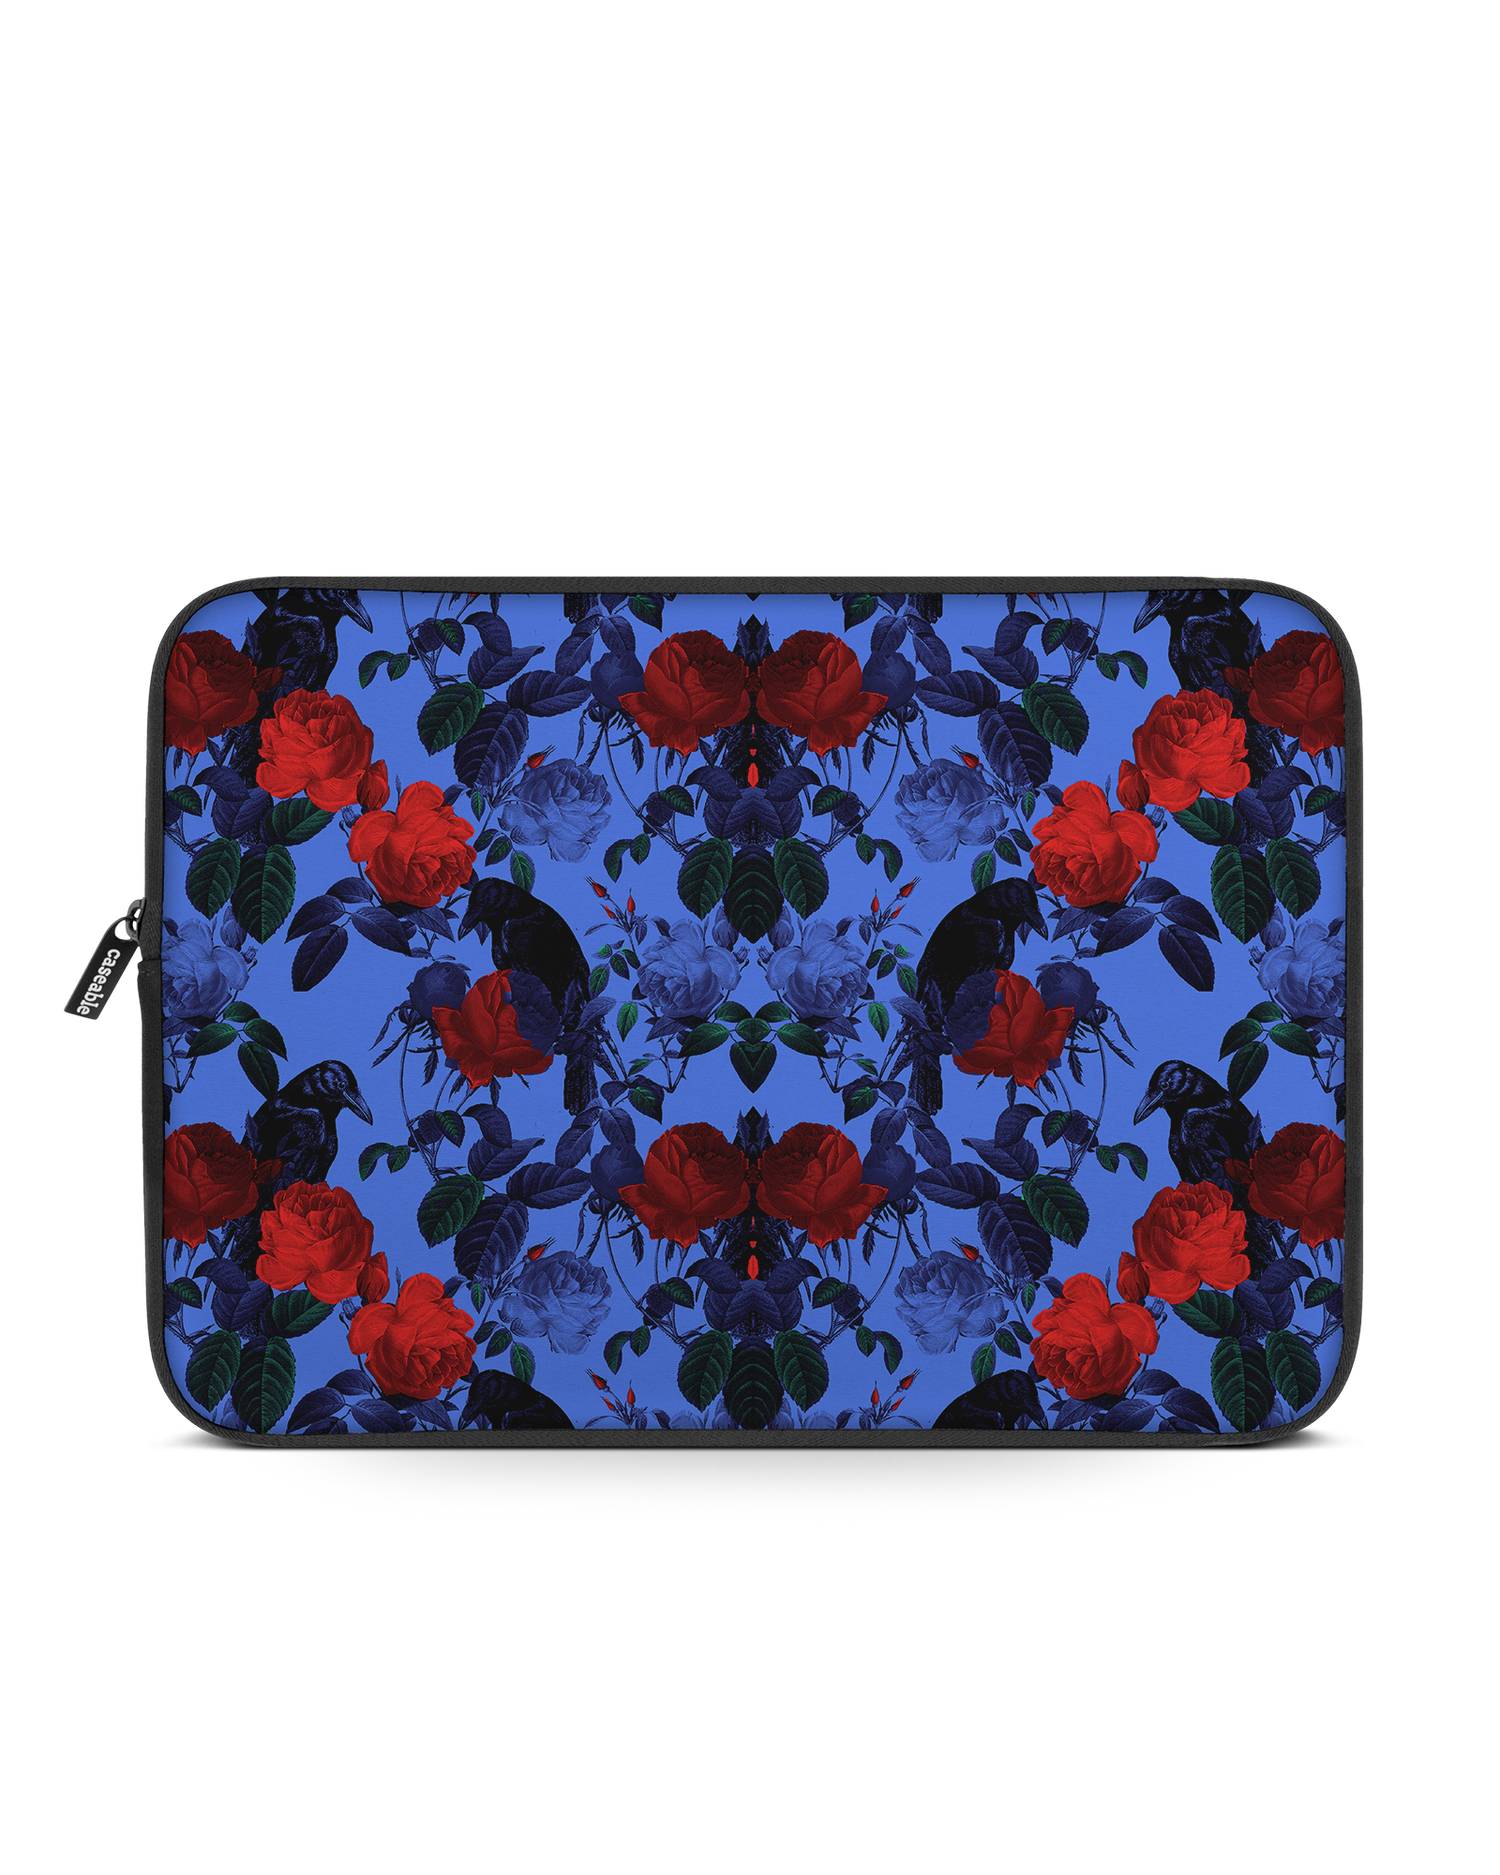 Roses And Ravens Laptop Case 16 inch: Front View